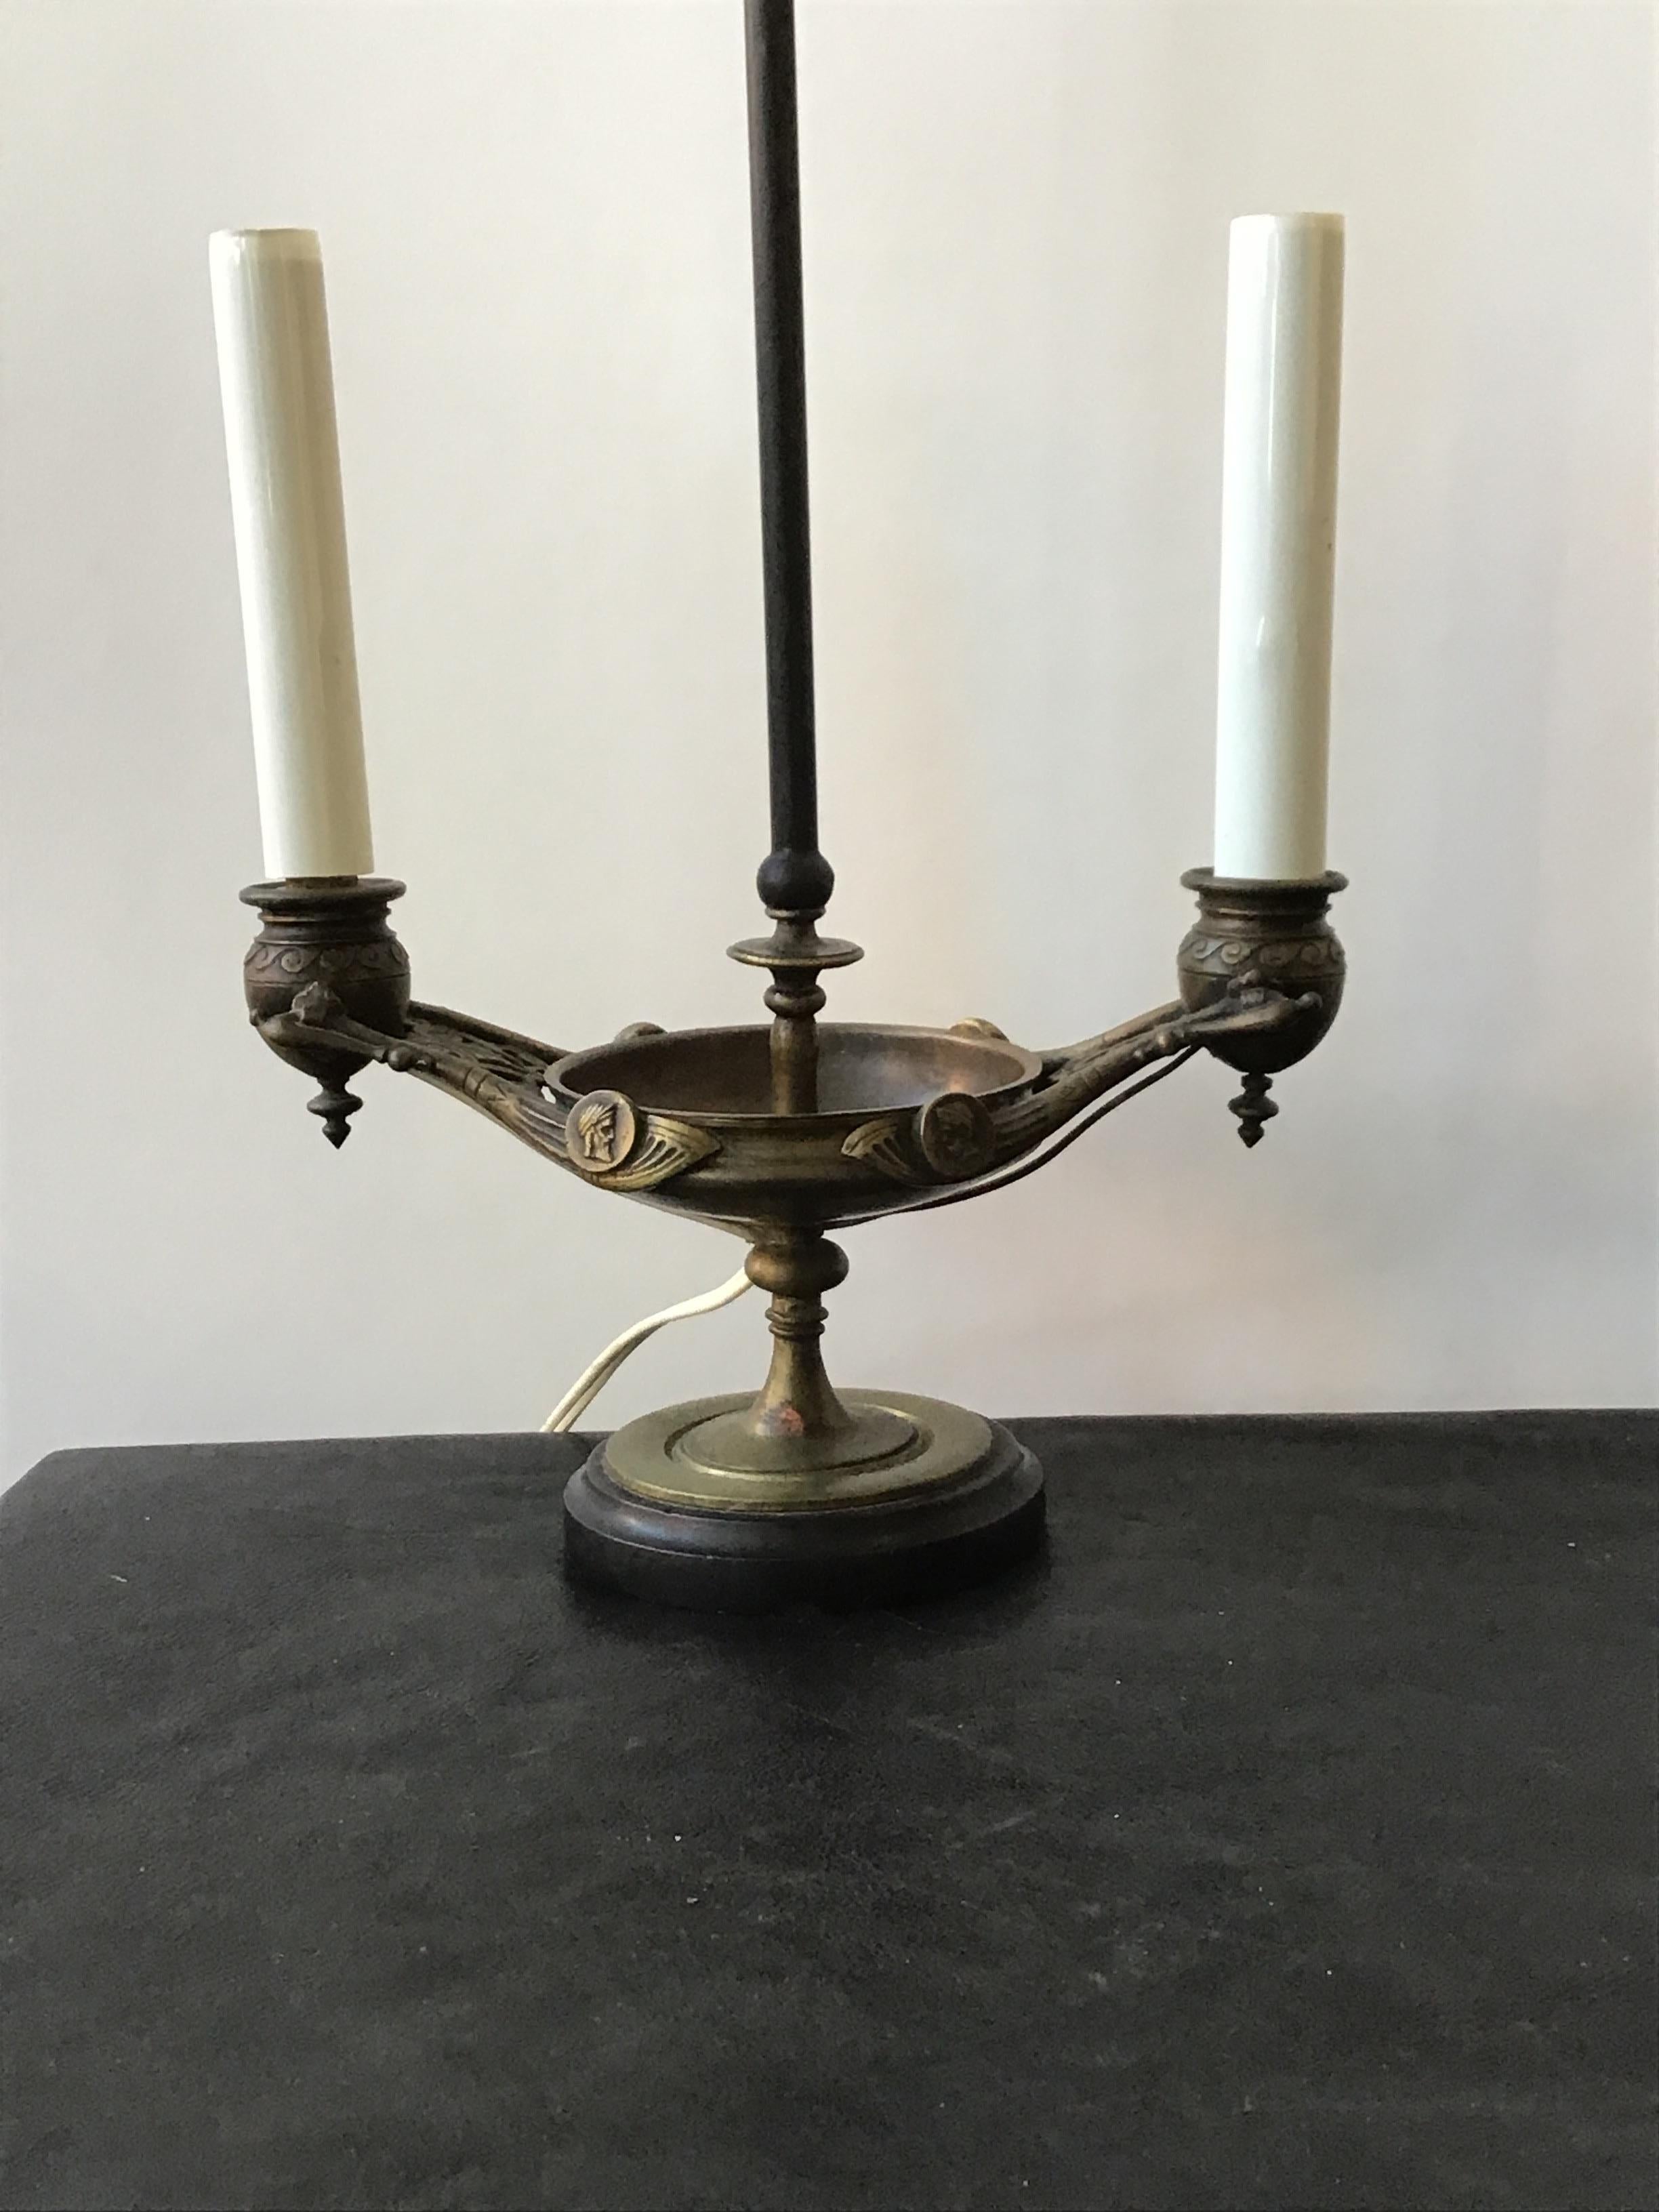 1870s Bronze Oil Lamp In Good Condition For Sale In Tarrytown, NY